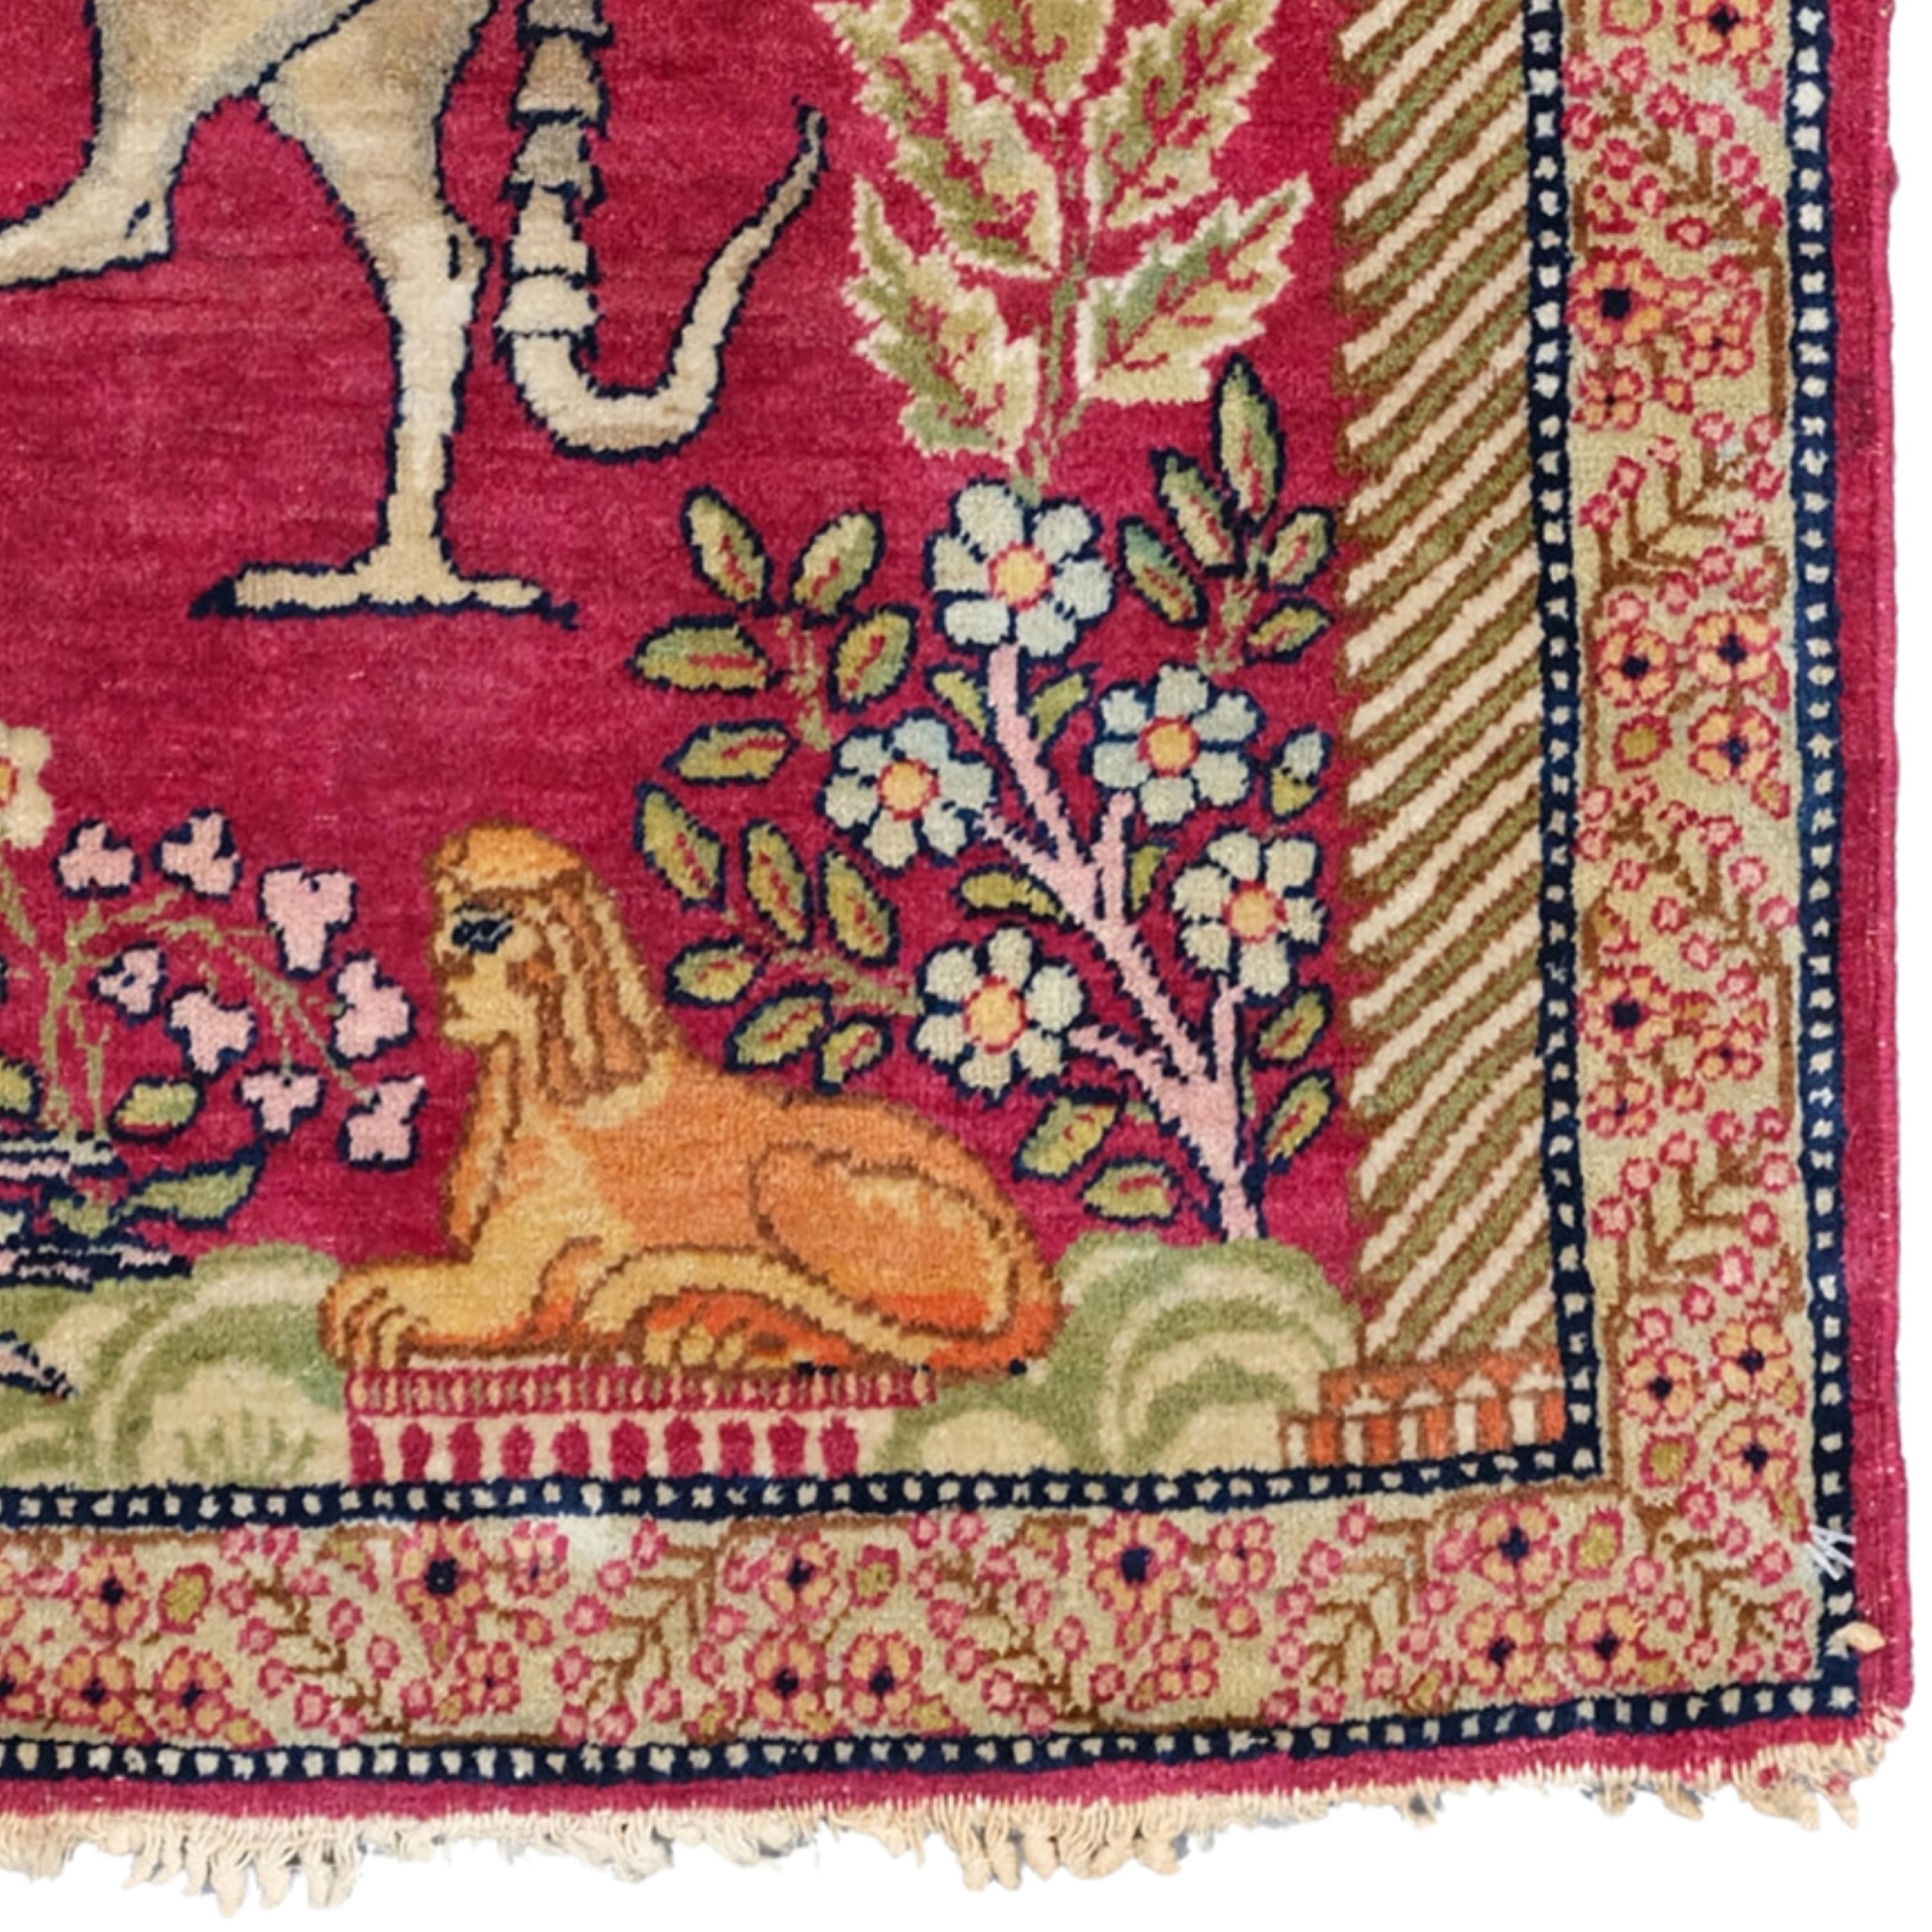 Antique Kerman Pictorial Rug - Mythological Tapestry Lion & King Darius In Good Condition For Sale In Sultanahmet, 34